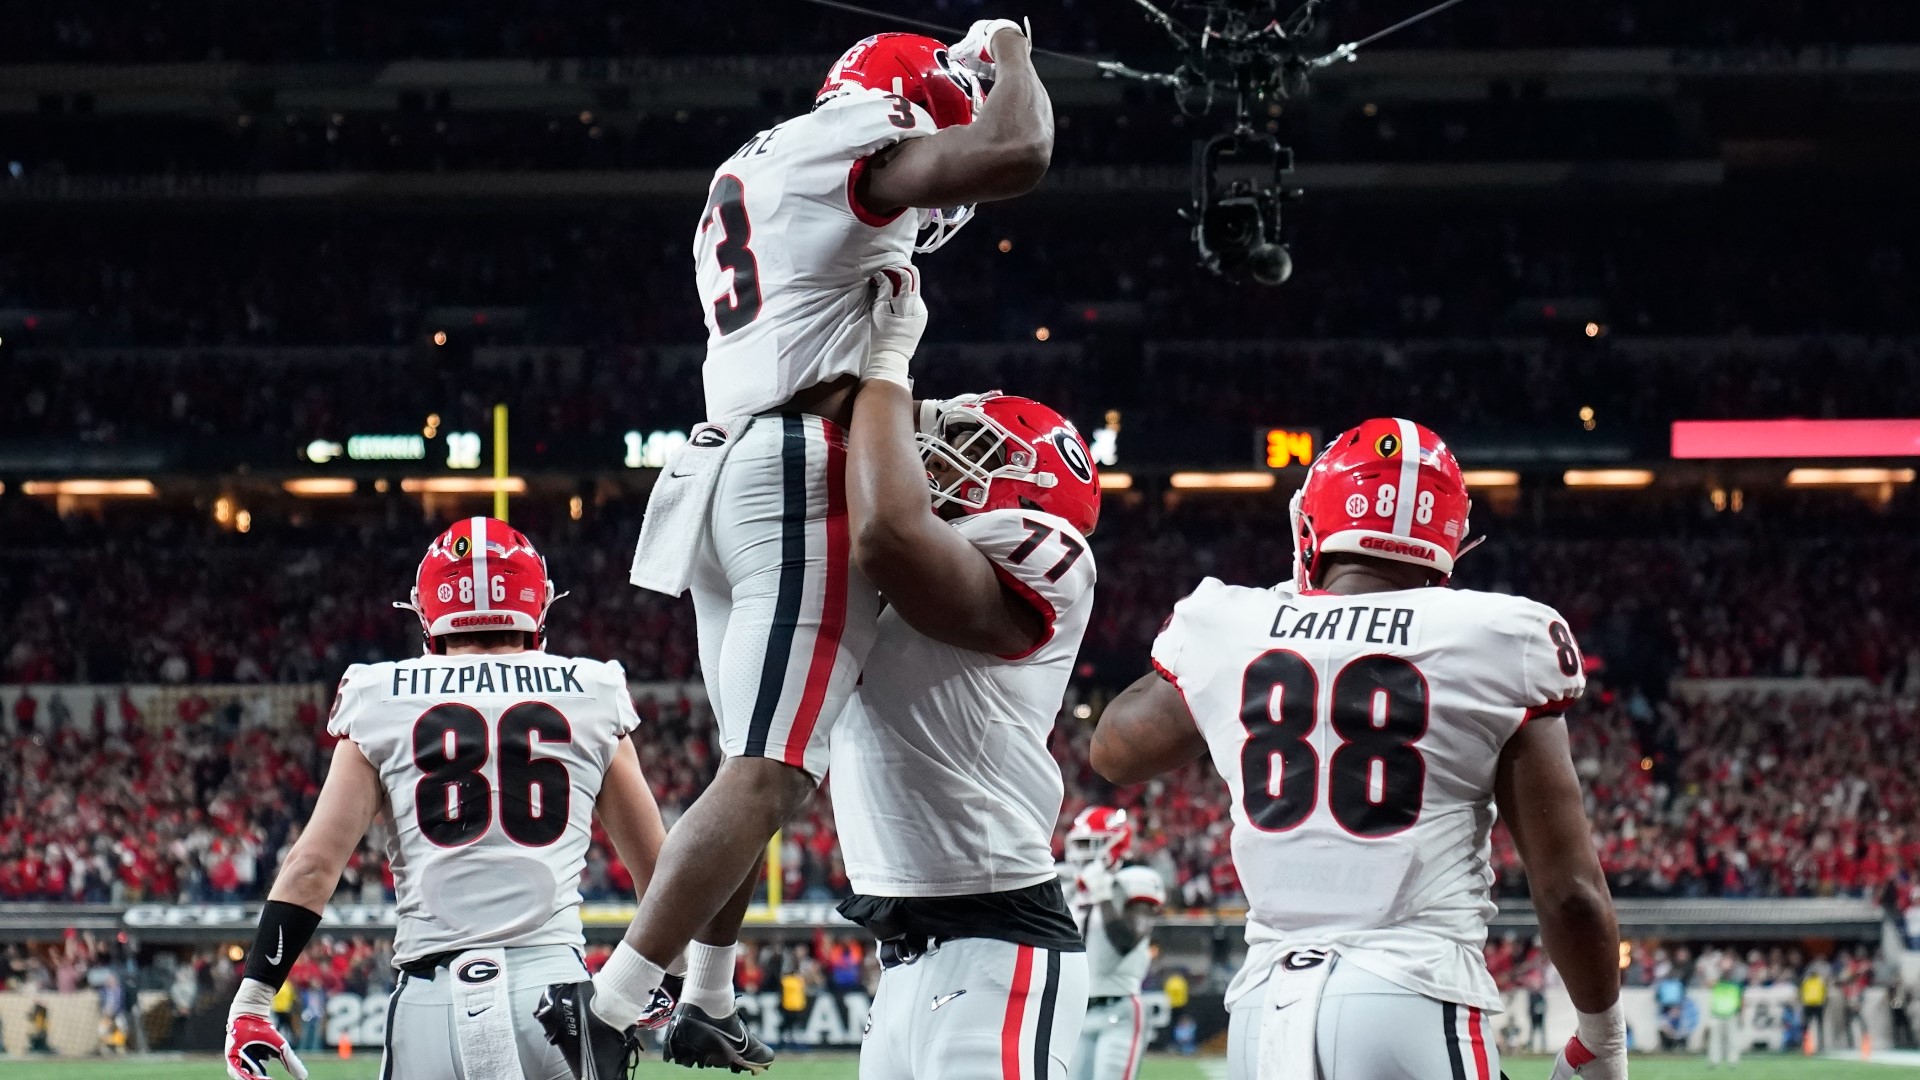 Georgia defeated Alabama 33-18 in the College Football Playoff National Championship. It's the team's first national title in 41 years.